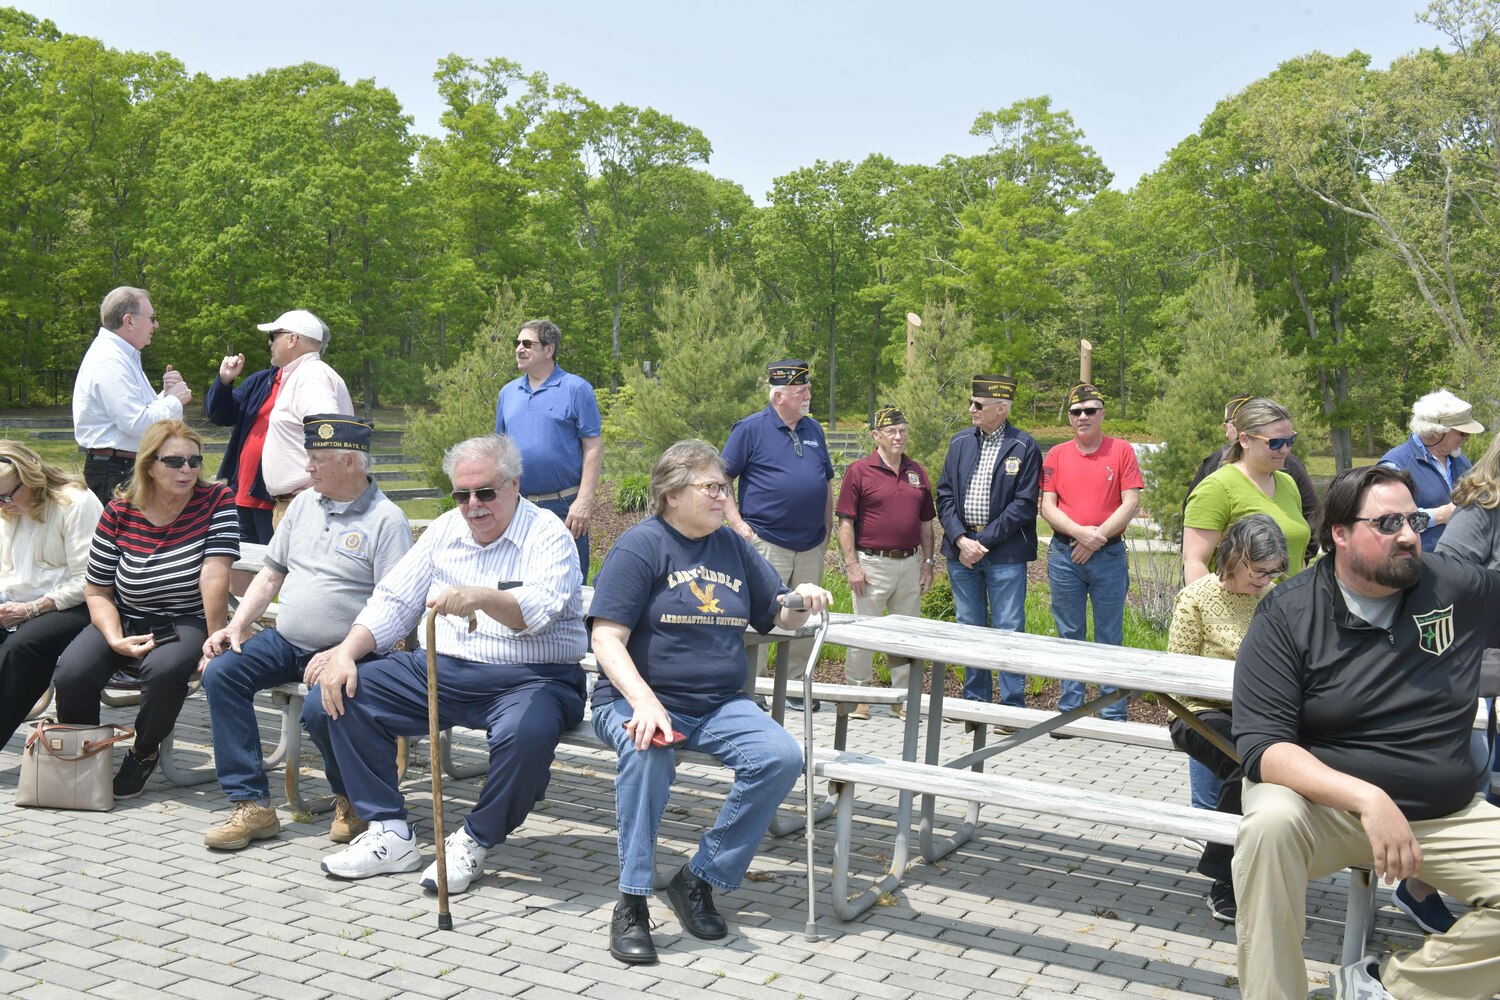 Veterans and civilians gathered in Good Ground Park in Hampton Bays on Monday for the unveiling of the 